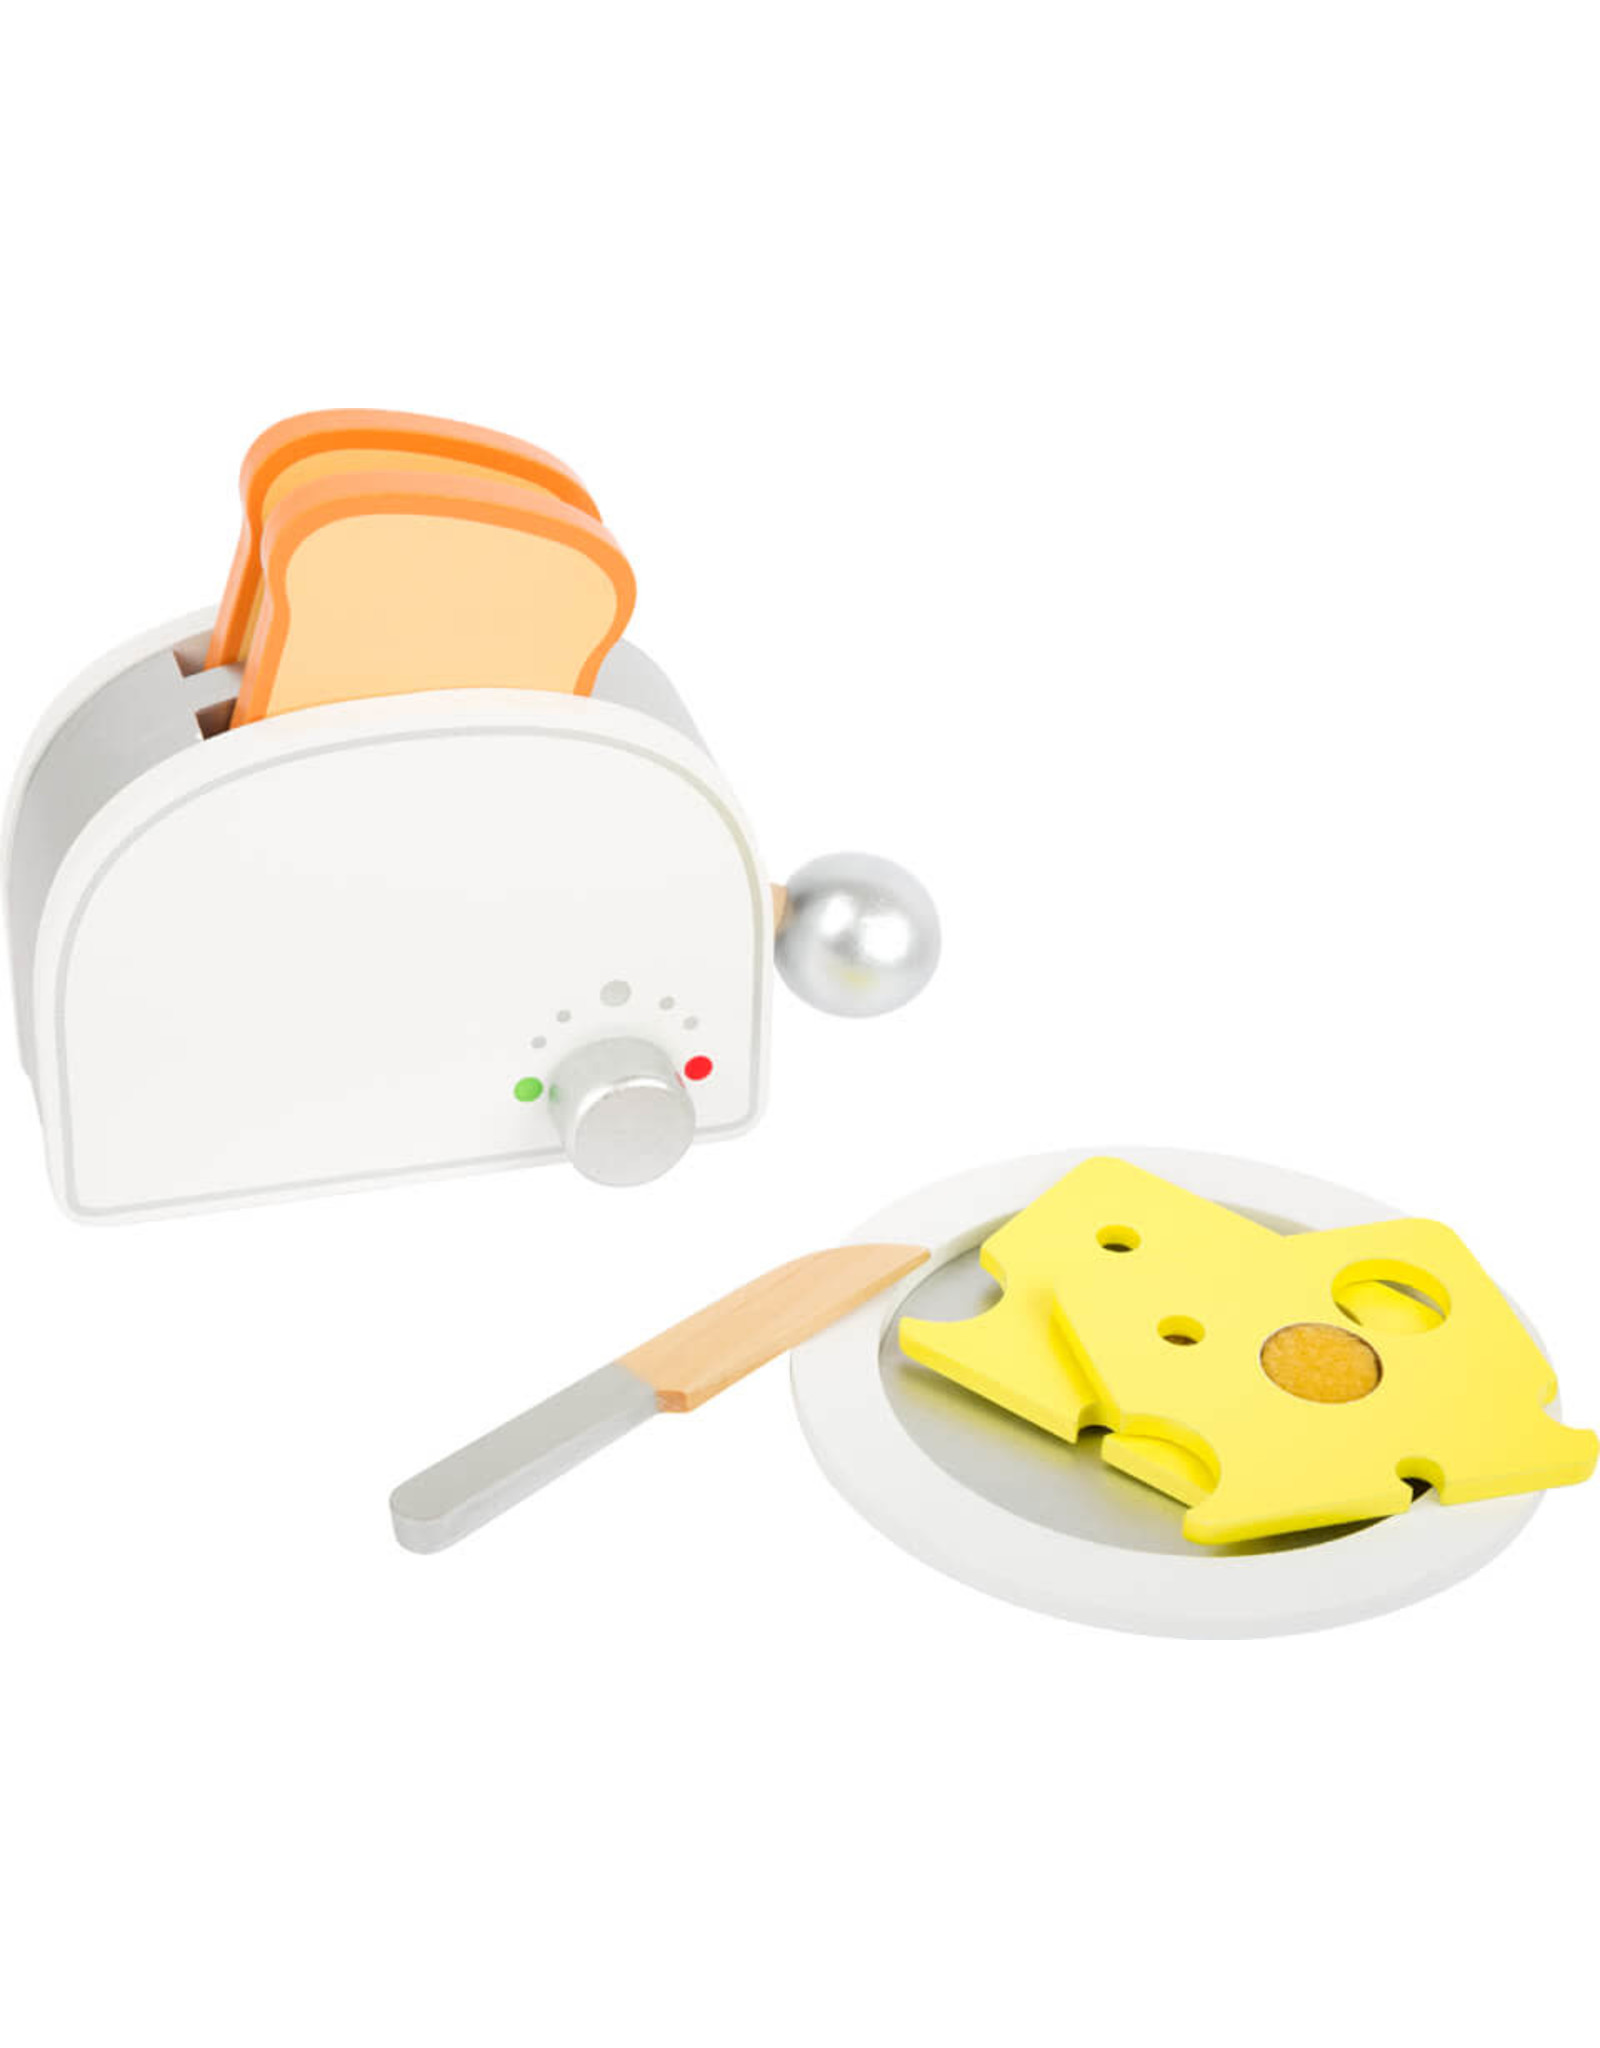 Breakfast Set for Play Kitchen